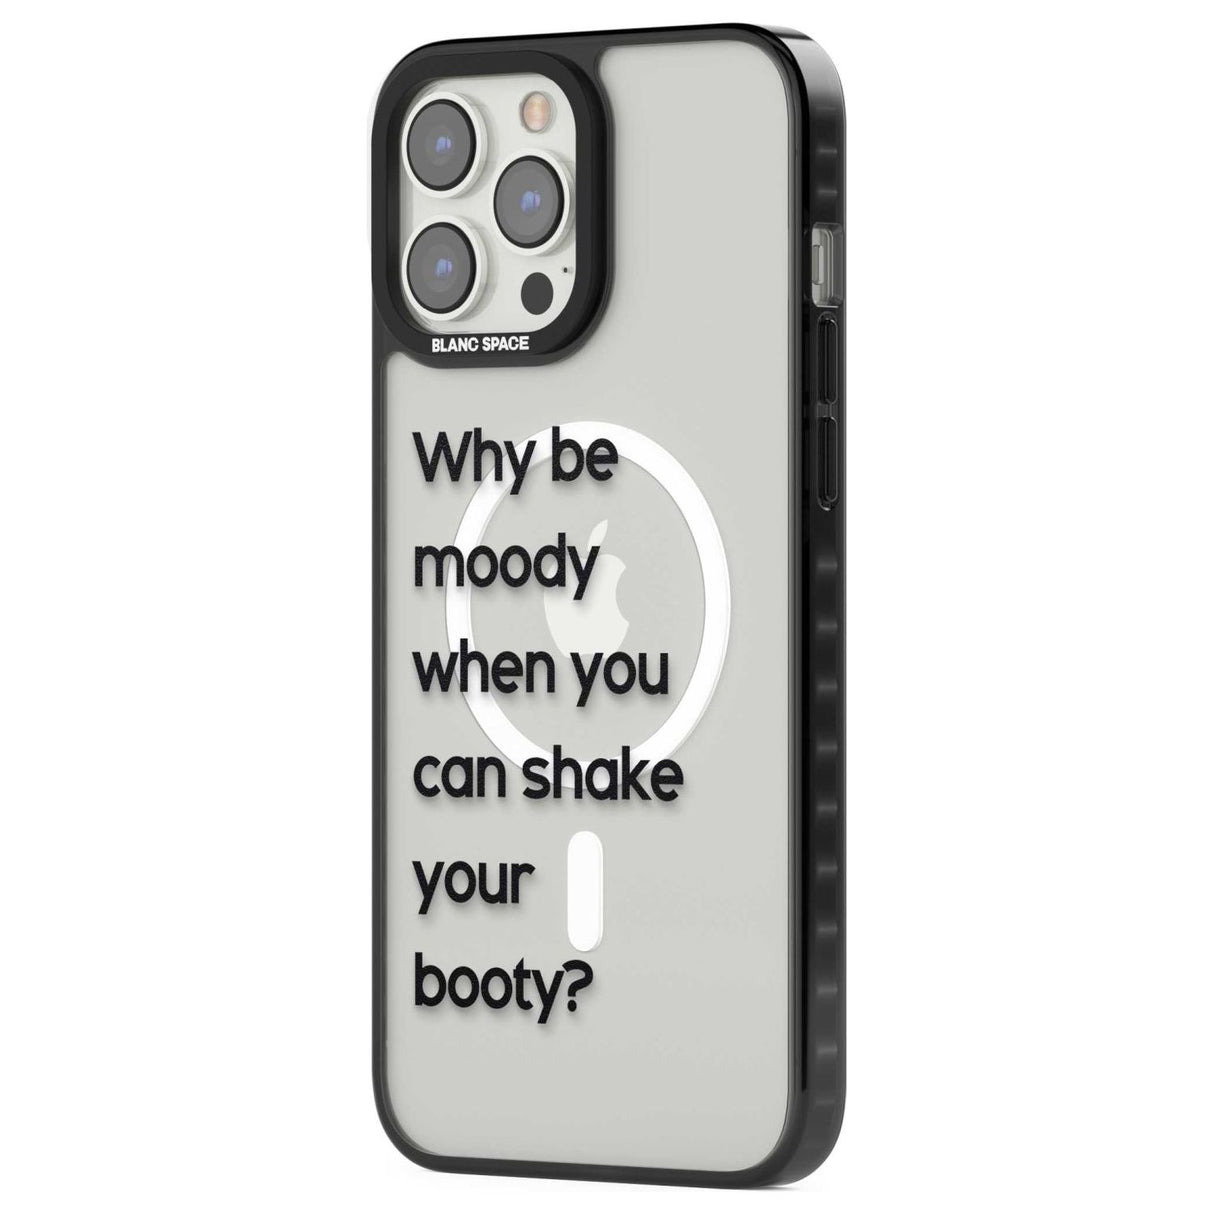 Why be moody?